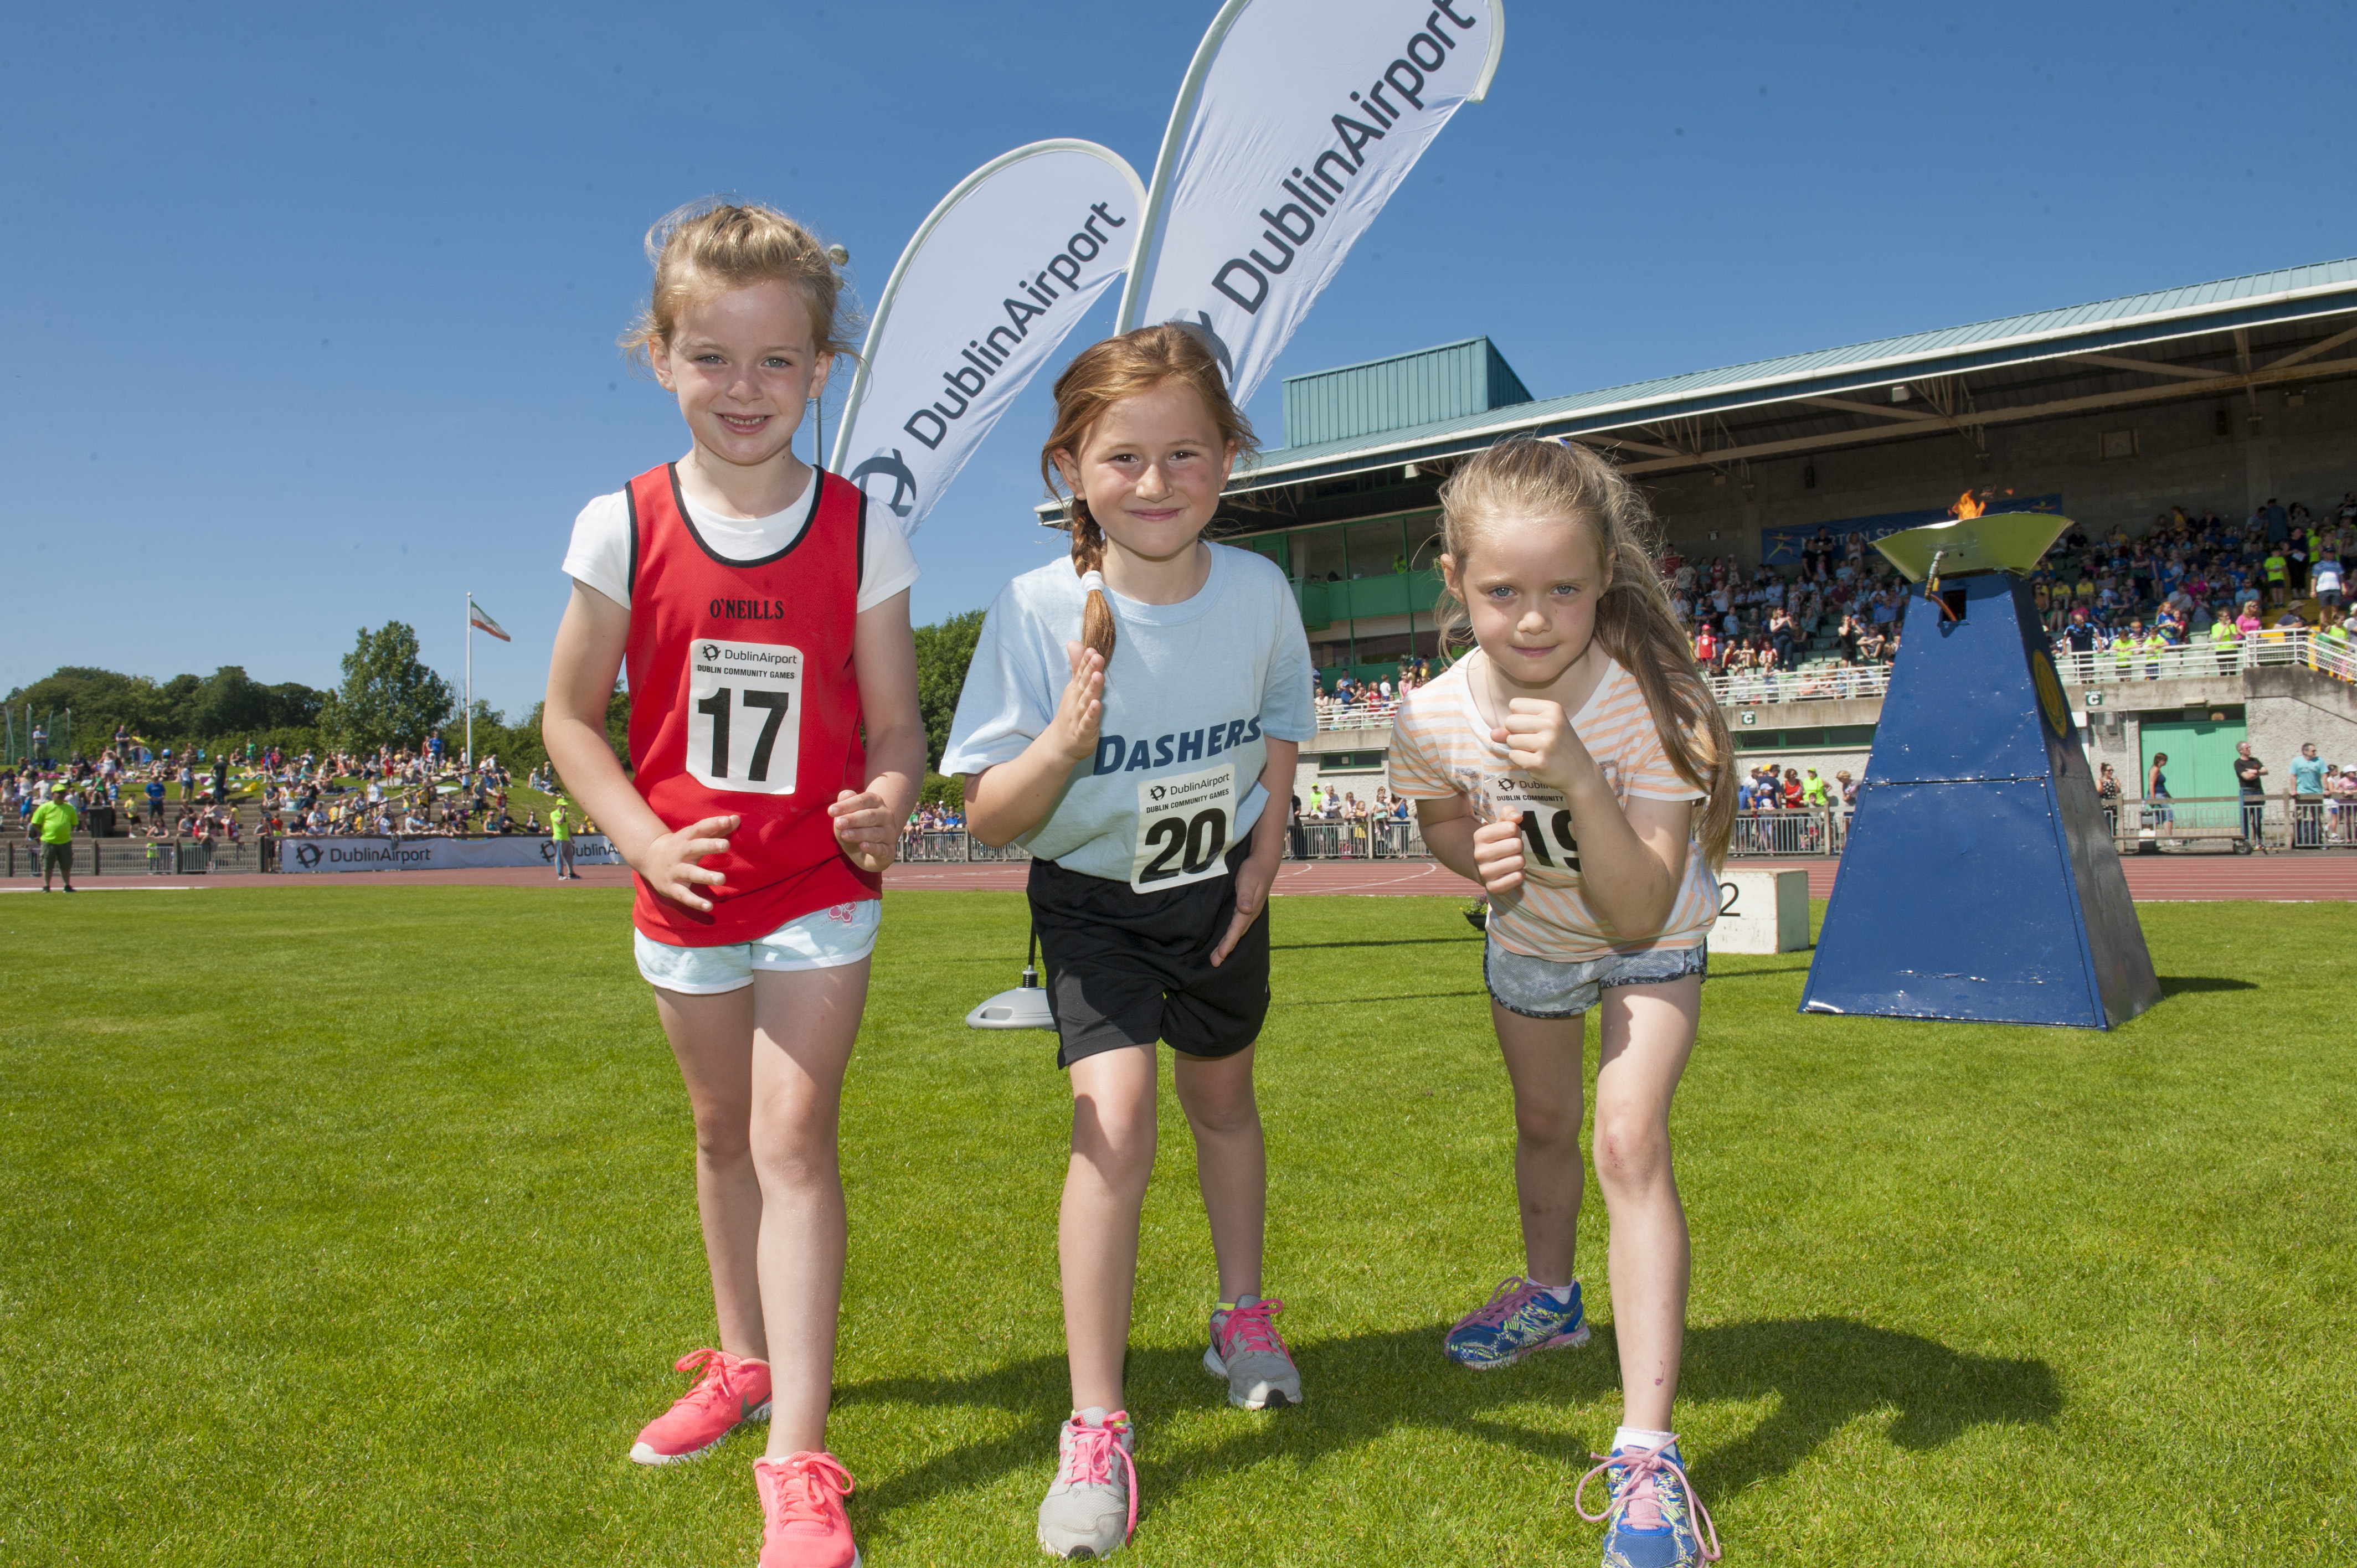 Dublin Airport sponsors community event, including the Community Games, through it's Community Fund